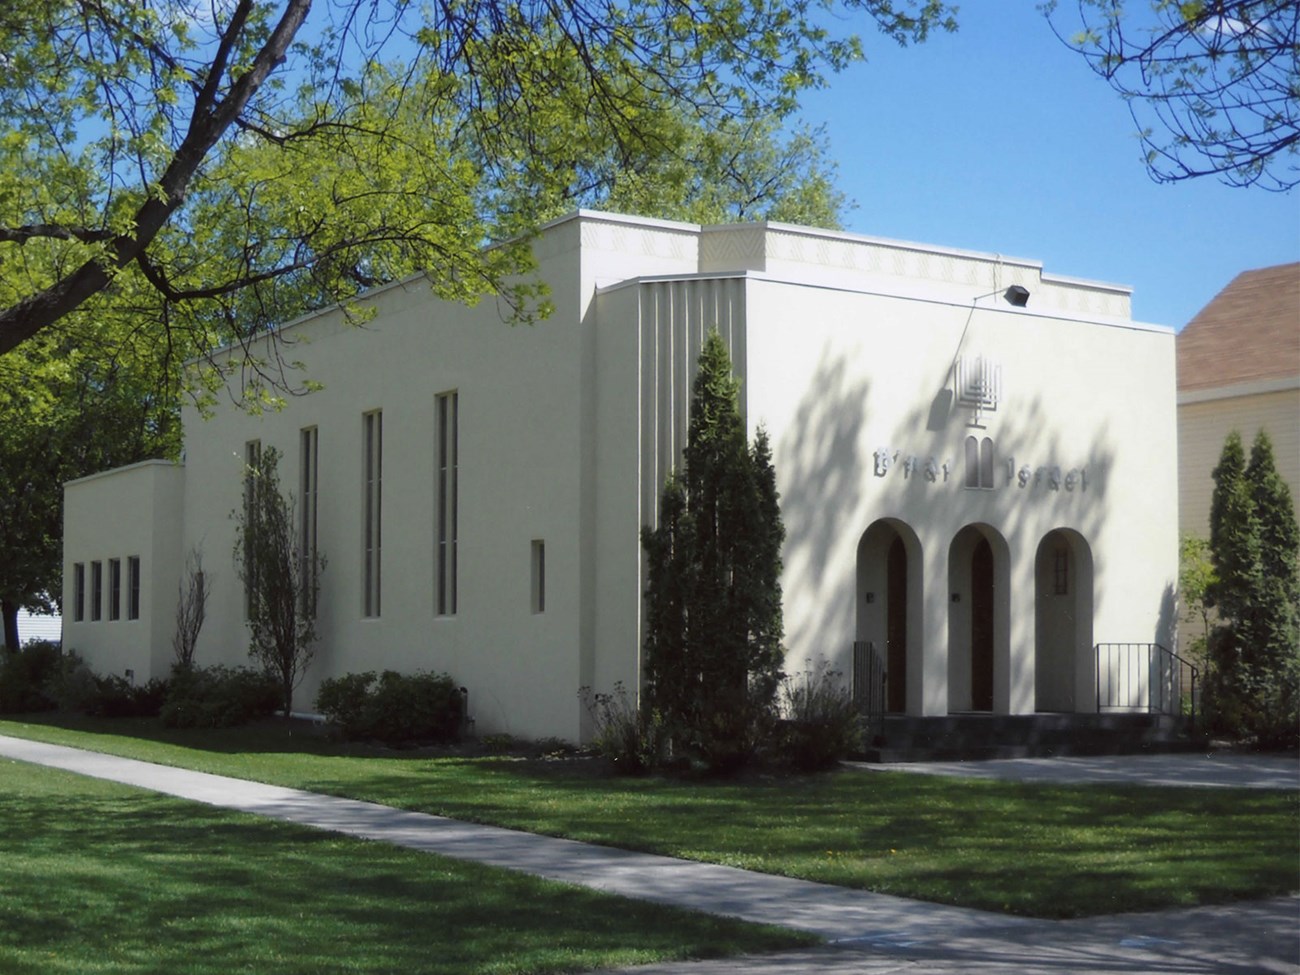 A light-colored building with three arched openings on the front and tall, narrow windows on the side. The words "B'nai Israel" are above the front entrance.